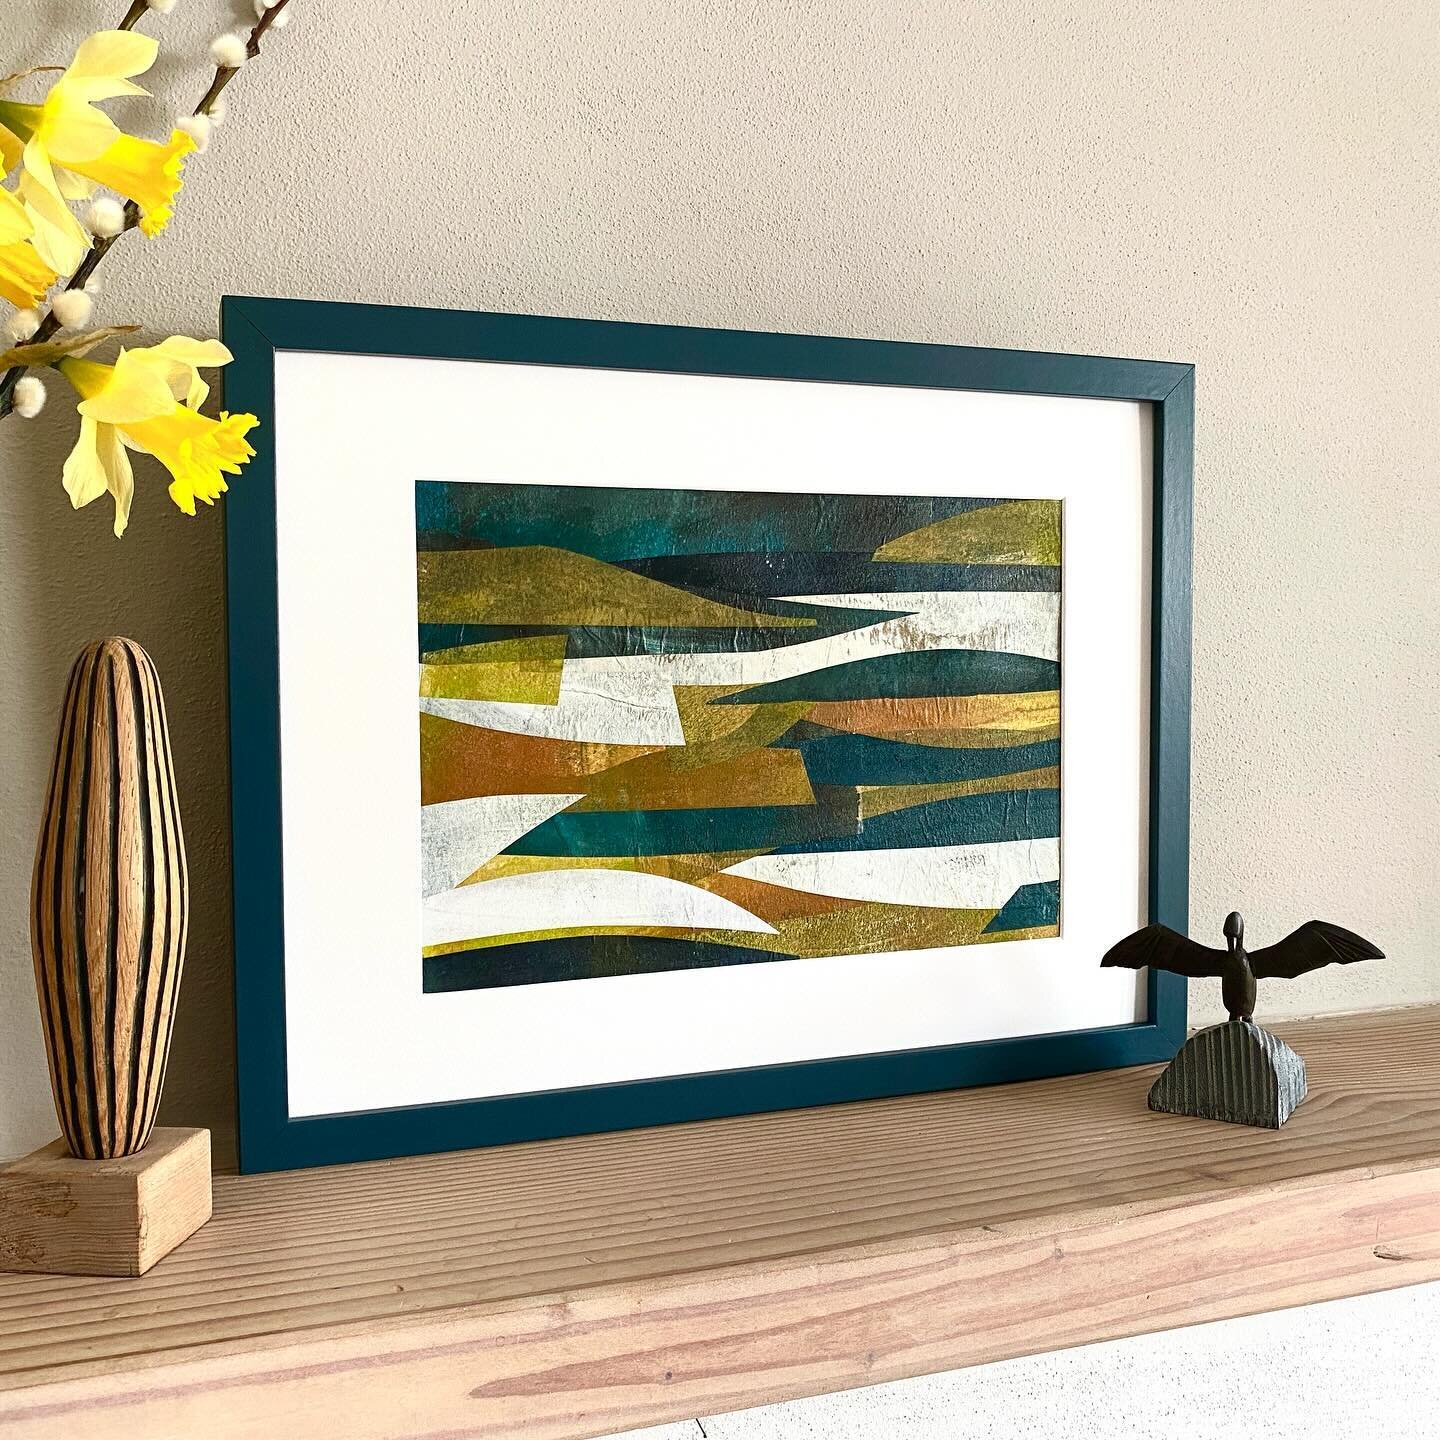 I&rsquo;ve never been one for dark frames but I have to say, they have their place sometimes! 
I repainted an old ikea frame with some Fired Earth &lsquo;Beneath the Waves&rsquo; eggshell and it really picks out the colours in the painting.
It makes 